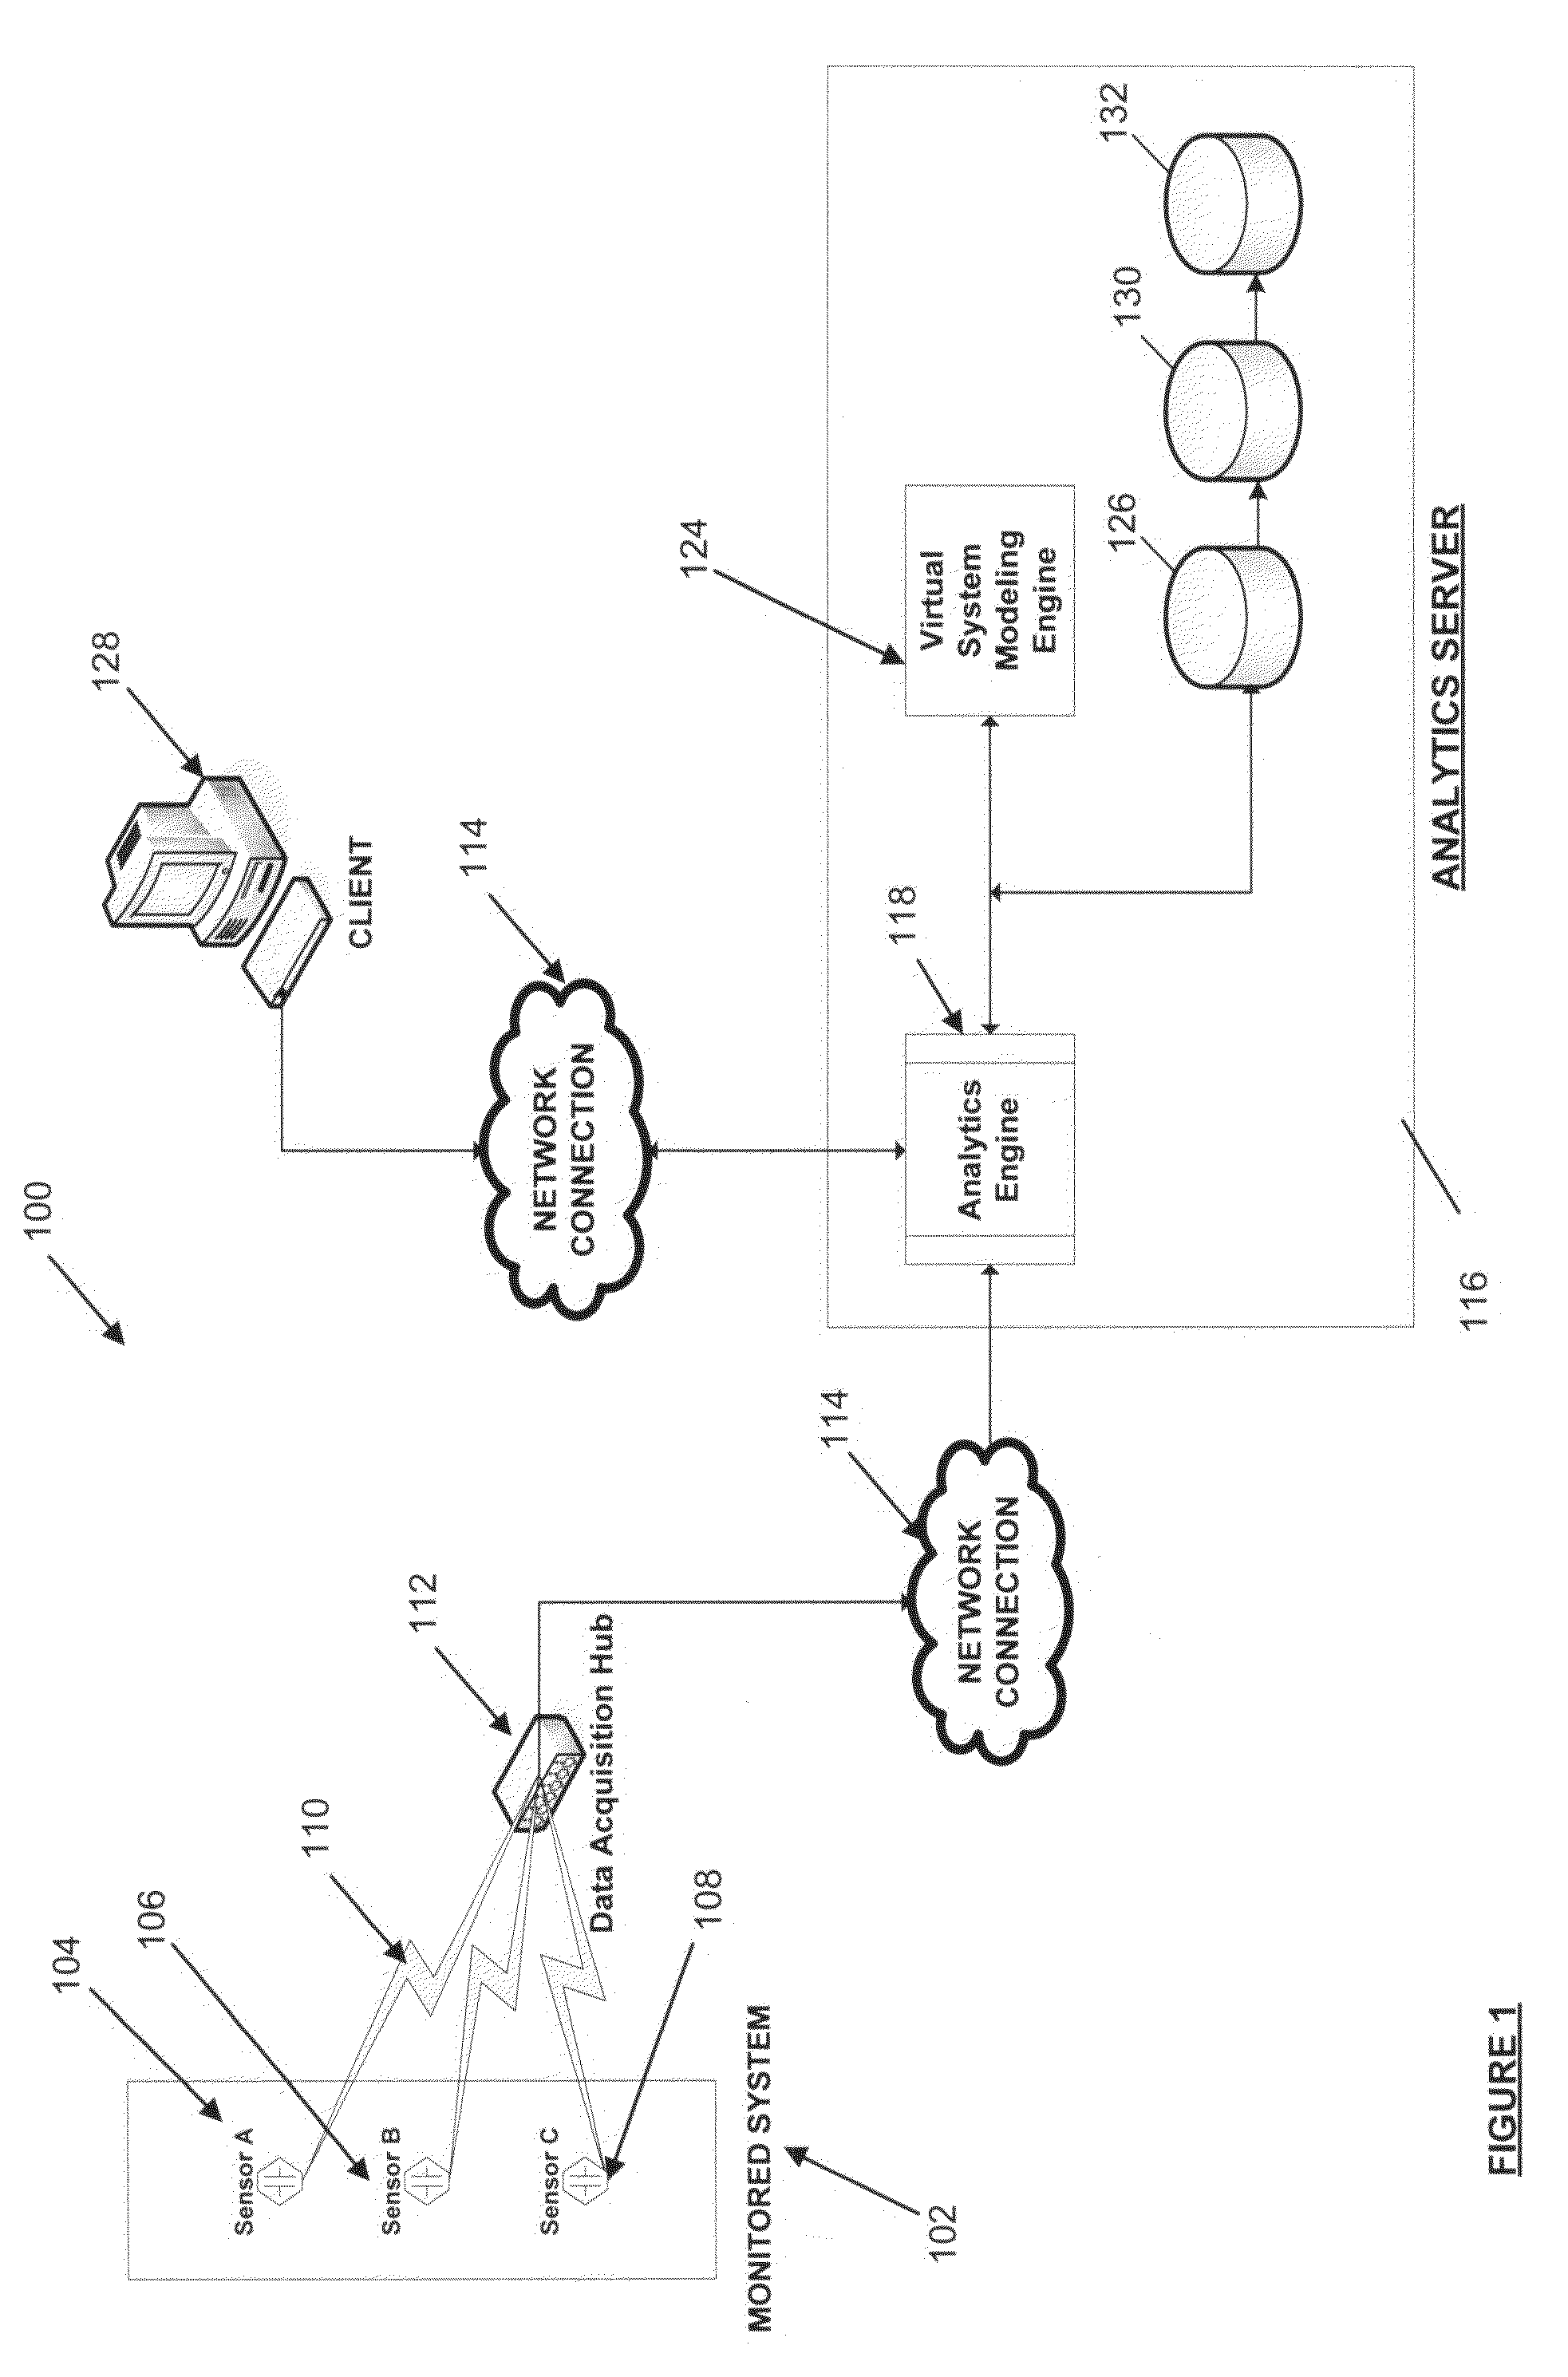 Systems and methods for real-time protective device evaluation in an electrical power distribution system